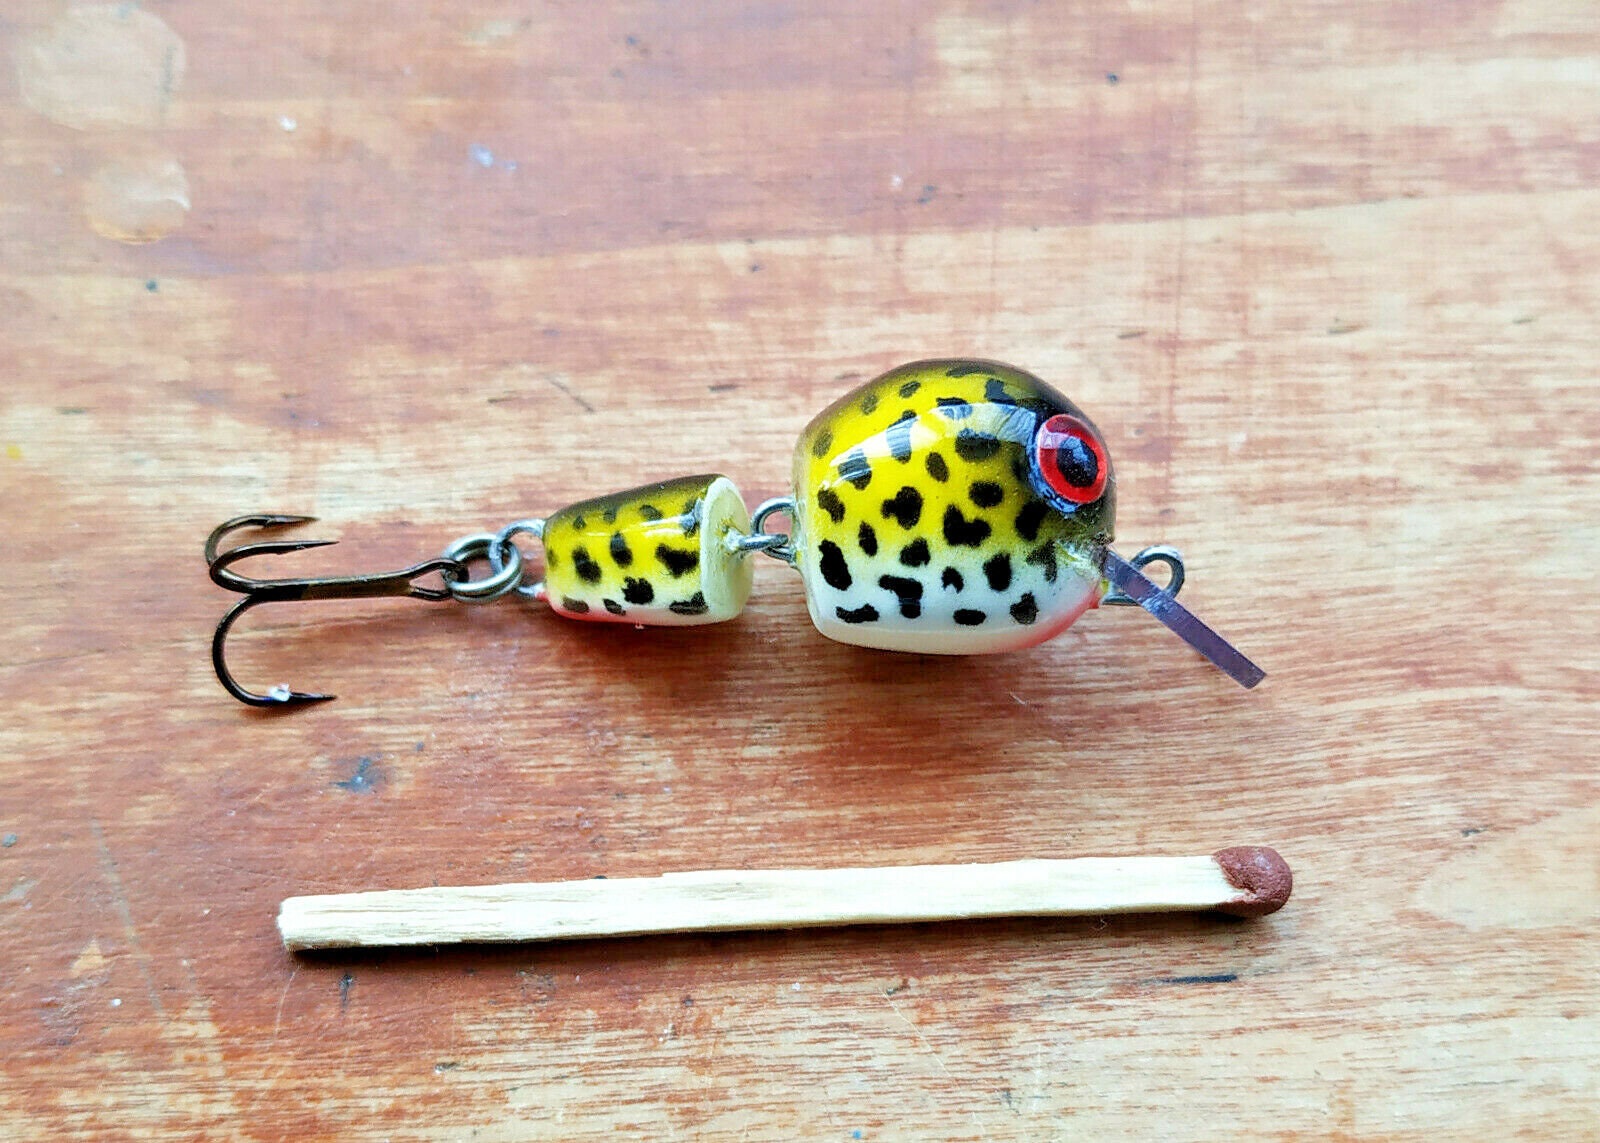 Super Ultra Light Jointed Handmade Lure 2,3 Cm 0.9 Inch 